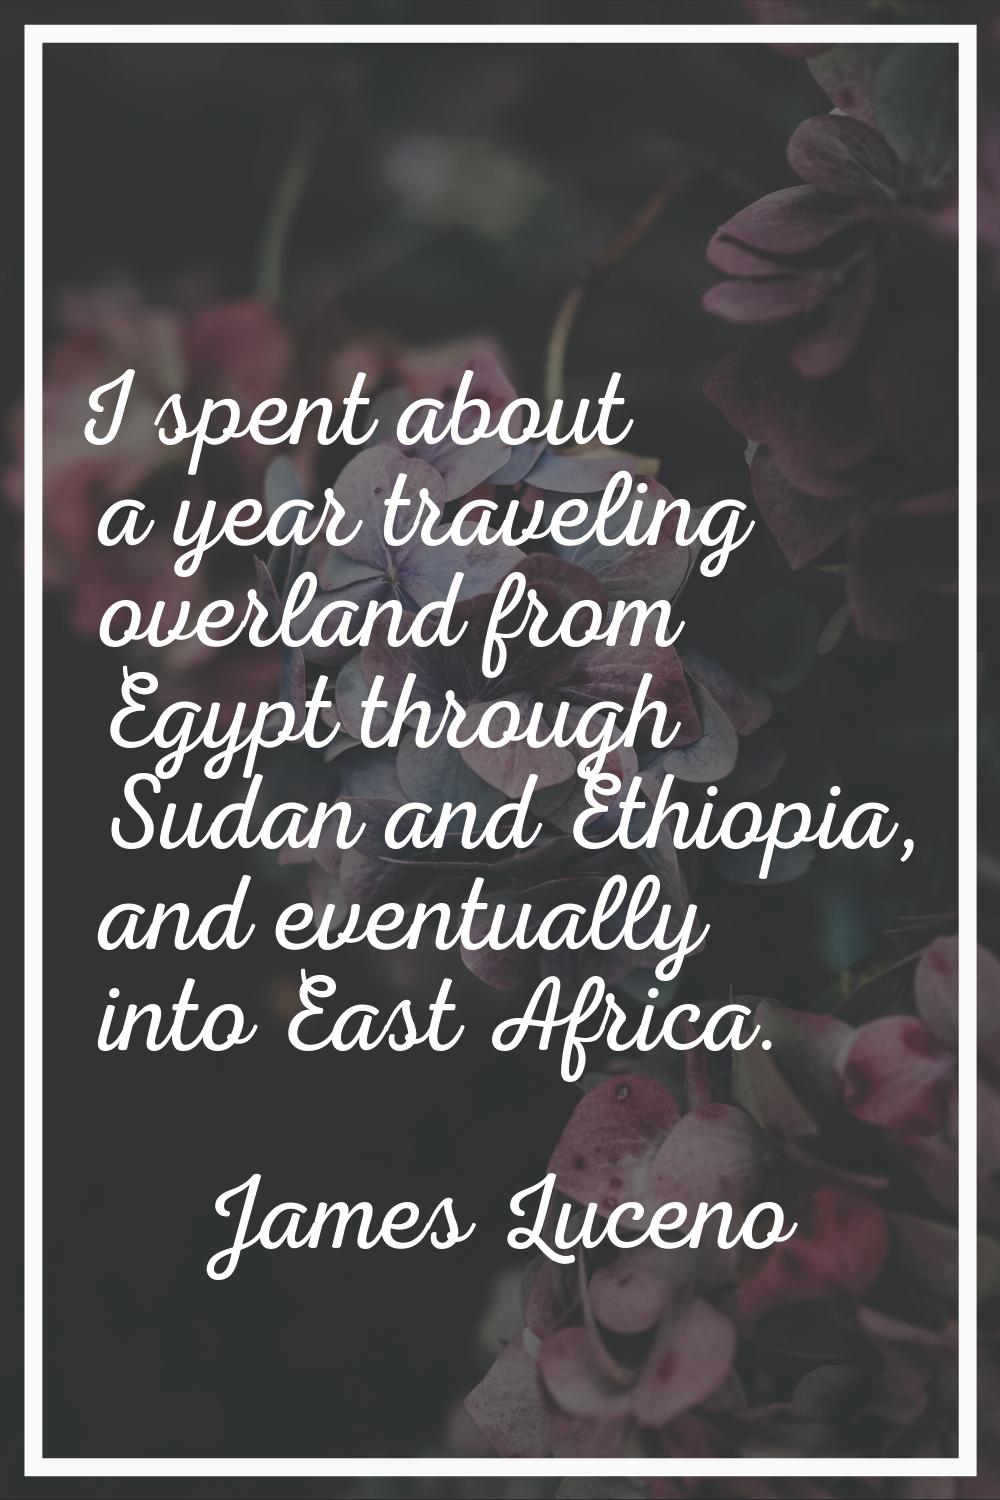 I spent about a year traveling overland from Egypt through Sudan and Ethiopia, and eventually into 